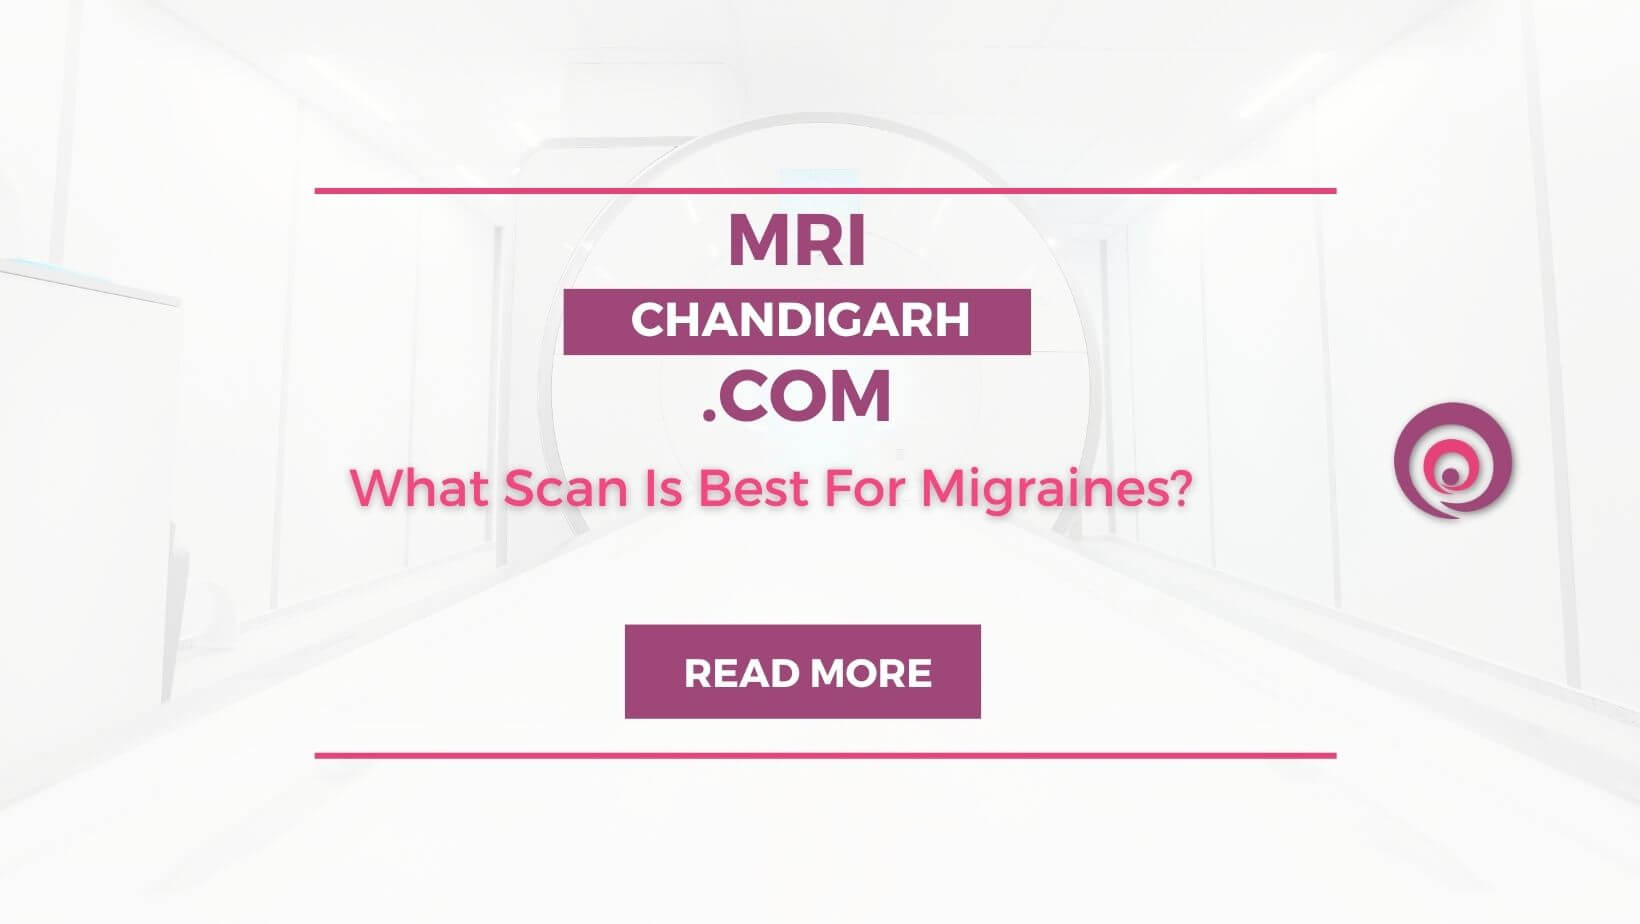 What Scan Is Best For Migraines?